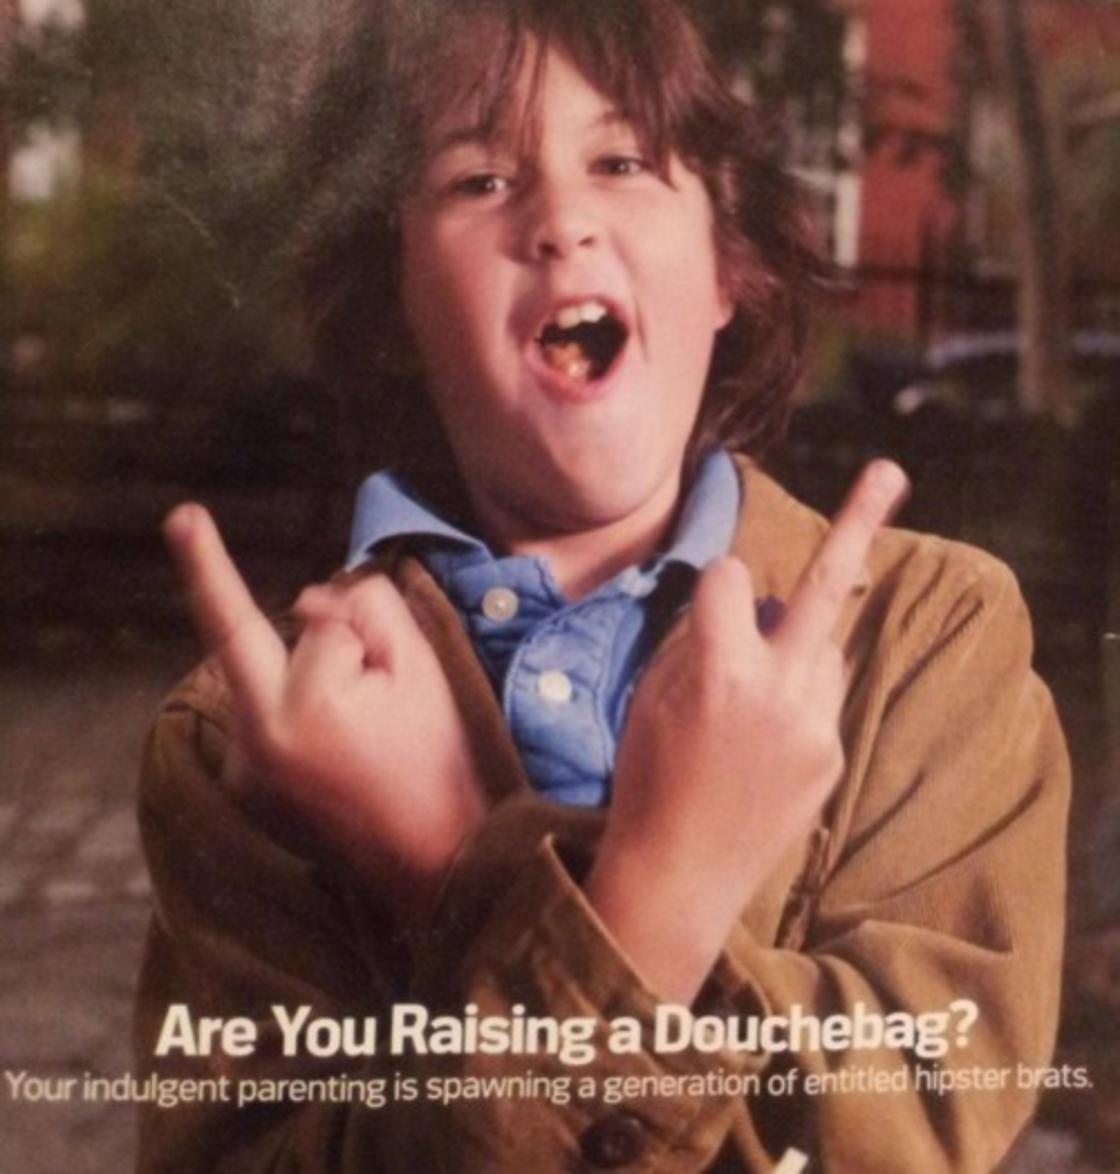 kids sex boy - Are You Raising a Douchebag? Your indulgent parenting is spawning a generation of entitled hipster brats.